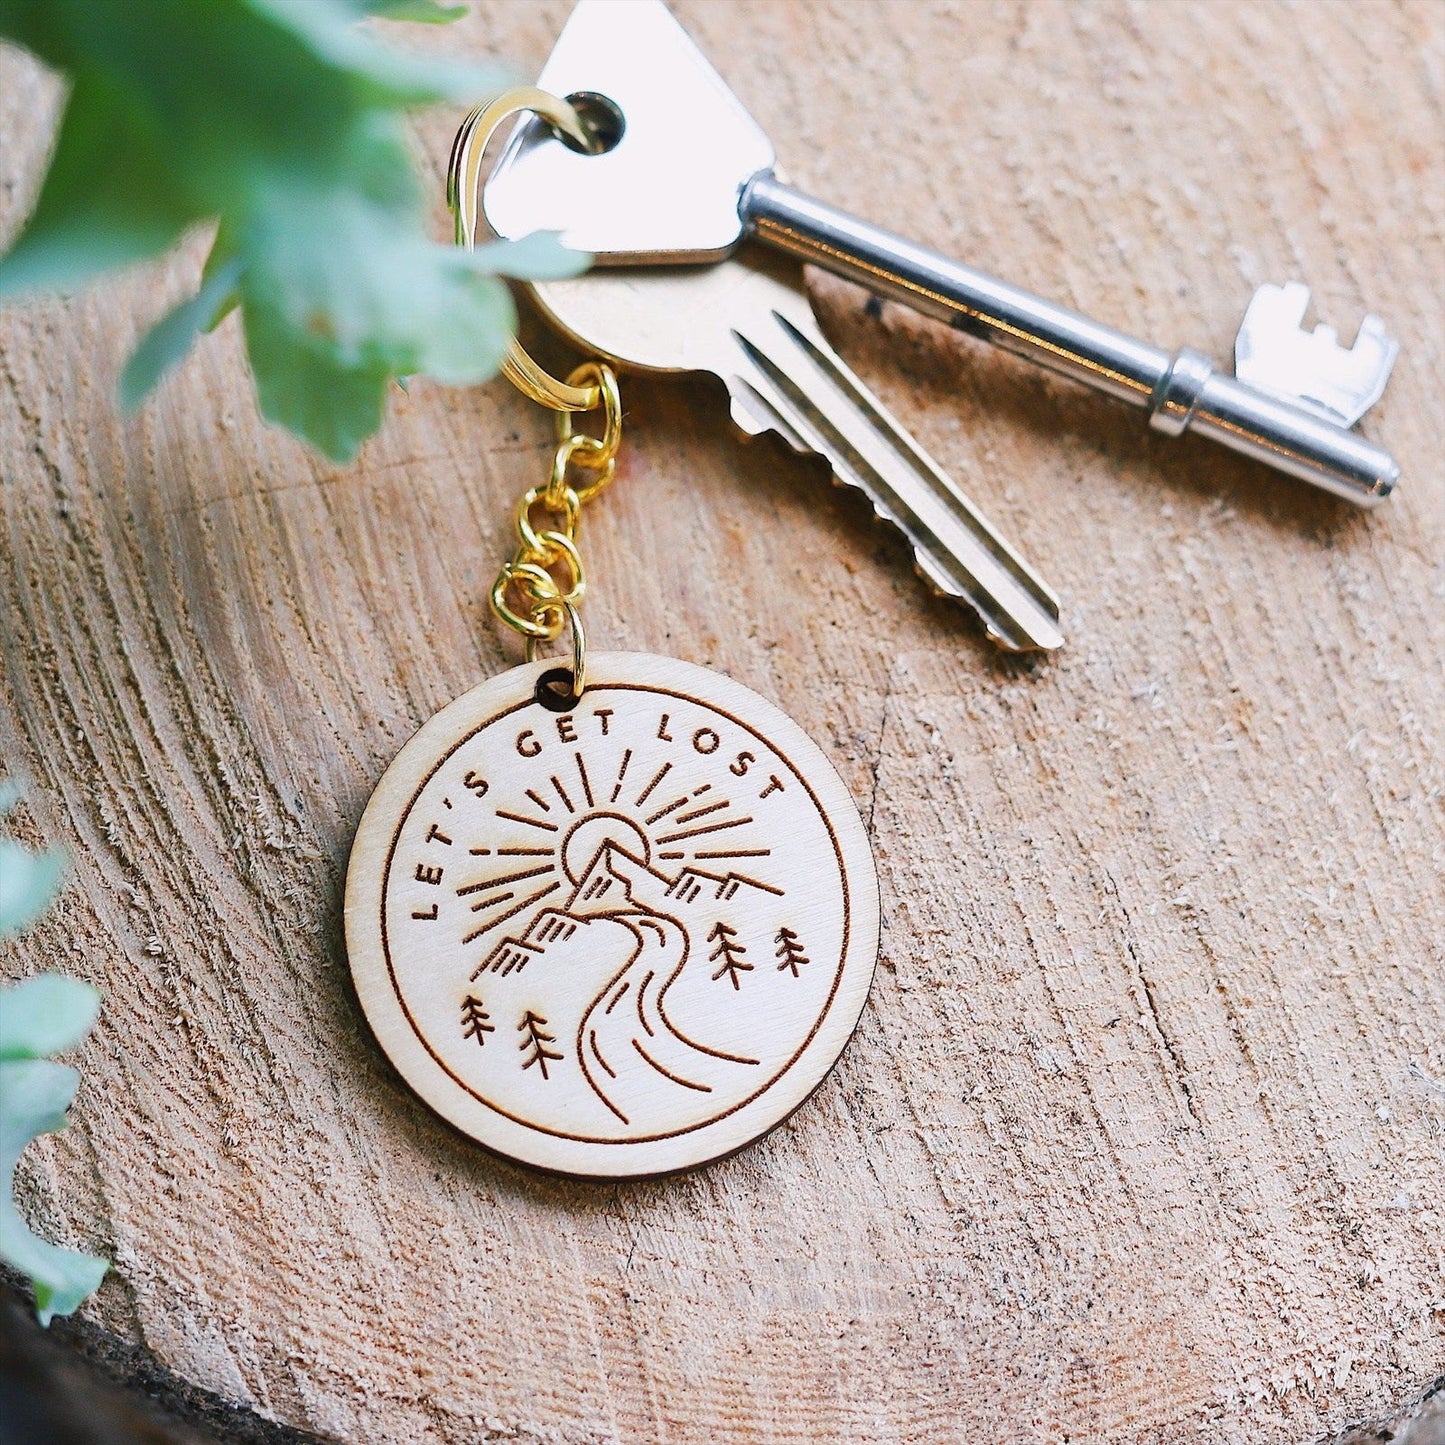 Let's Get Lost Wooden Keychain